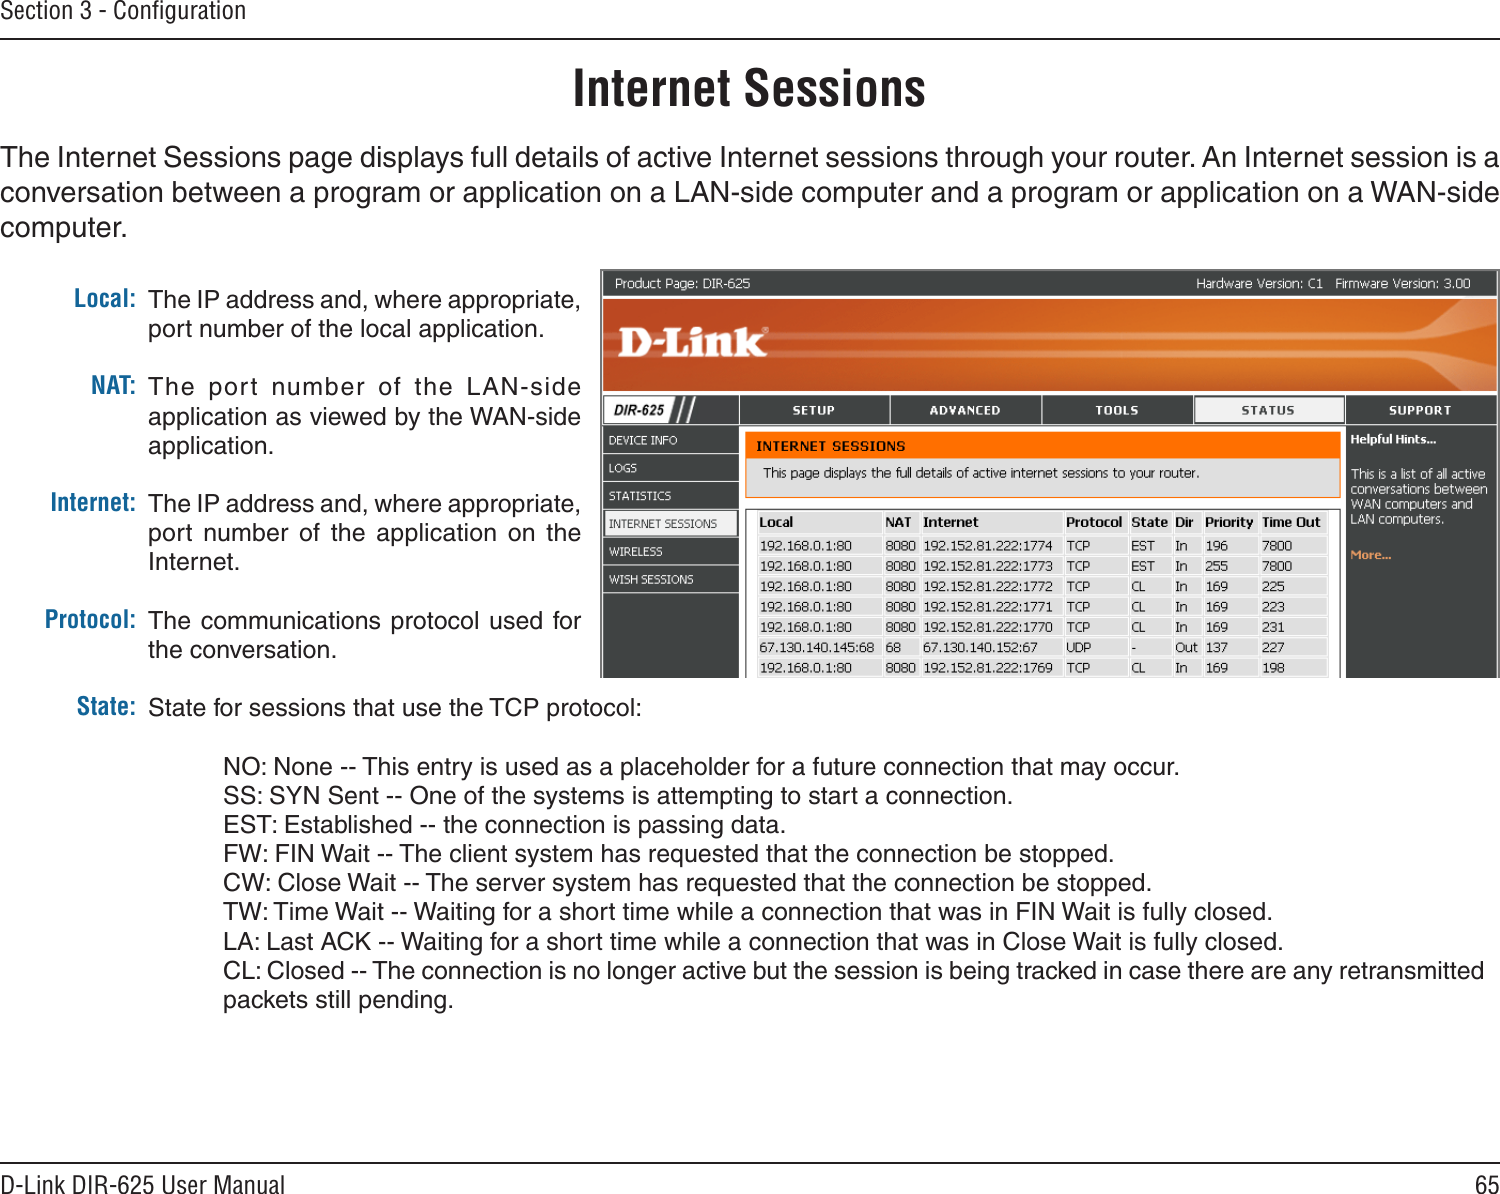 65D-Link DIR-625 User ManualSection 3 - ConﬁgurationInternet SessionsThe Internet Sessions page displays full details of active Internet sessions through your router. An Internet session is a conversation between a program or application on a LAN-side computer and a program or application on a WAN-side computer. Local:NAT:Internet:Protocol:State:The IP address and, where appropriate, port number of the local application. The  port  number  of  the  LAN-side application as viewed by the WAN-side application. The IP address and, where appropriate, port  number  of  the  application  on  the Internet. The communications protocol used  for the conversation. State for sessions that use the TCP protocol:  NO: None -- This entry is used as a placeholder for a future connection that may occur.  SS: SYN Sent -- One of the systems is attempting to start a connection.  EST: Established -- the connection is passing data.  FW: FIN Wait -- The client system has requested that the connection be stopped.  CW: Close Wait -- The server system has requested that the connection be stopped.  TW: Time Wait -- Waiting for a short time while a connection that was in FIN Wait is fully closed.  LA: Last ACK -- Waiting for a short time while a connection that was in Close Wait is fully closed. CL: Closed -- The connection is no longer active but the session is being tracked in case there are any retransmitted packets still pending.